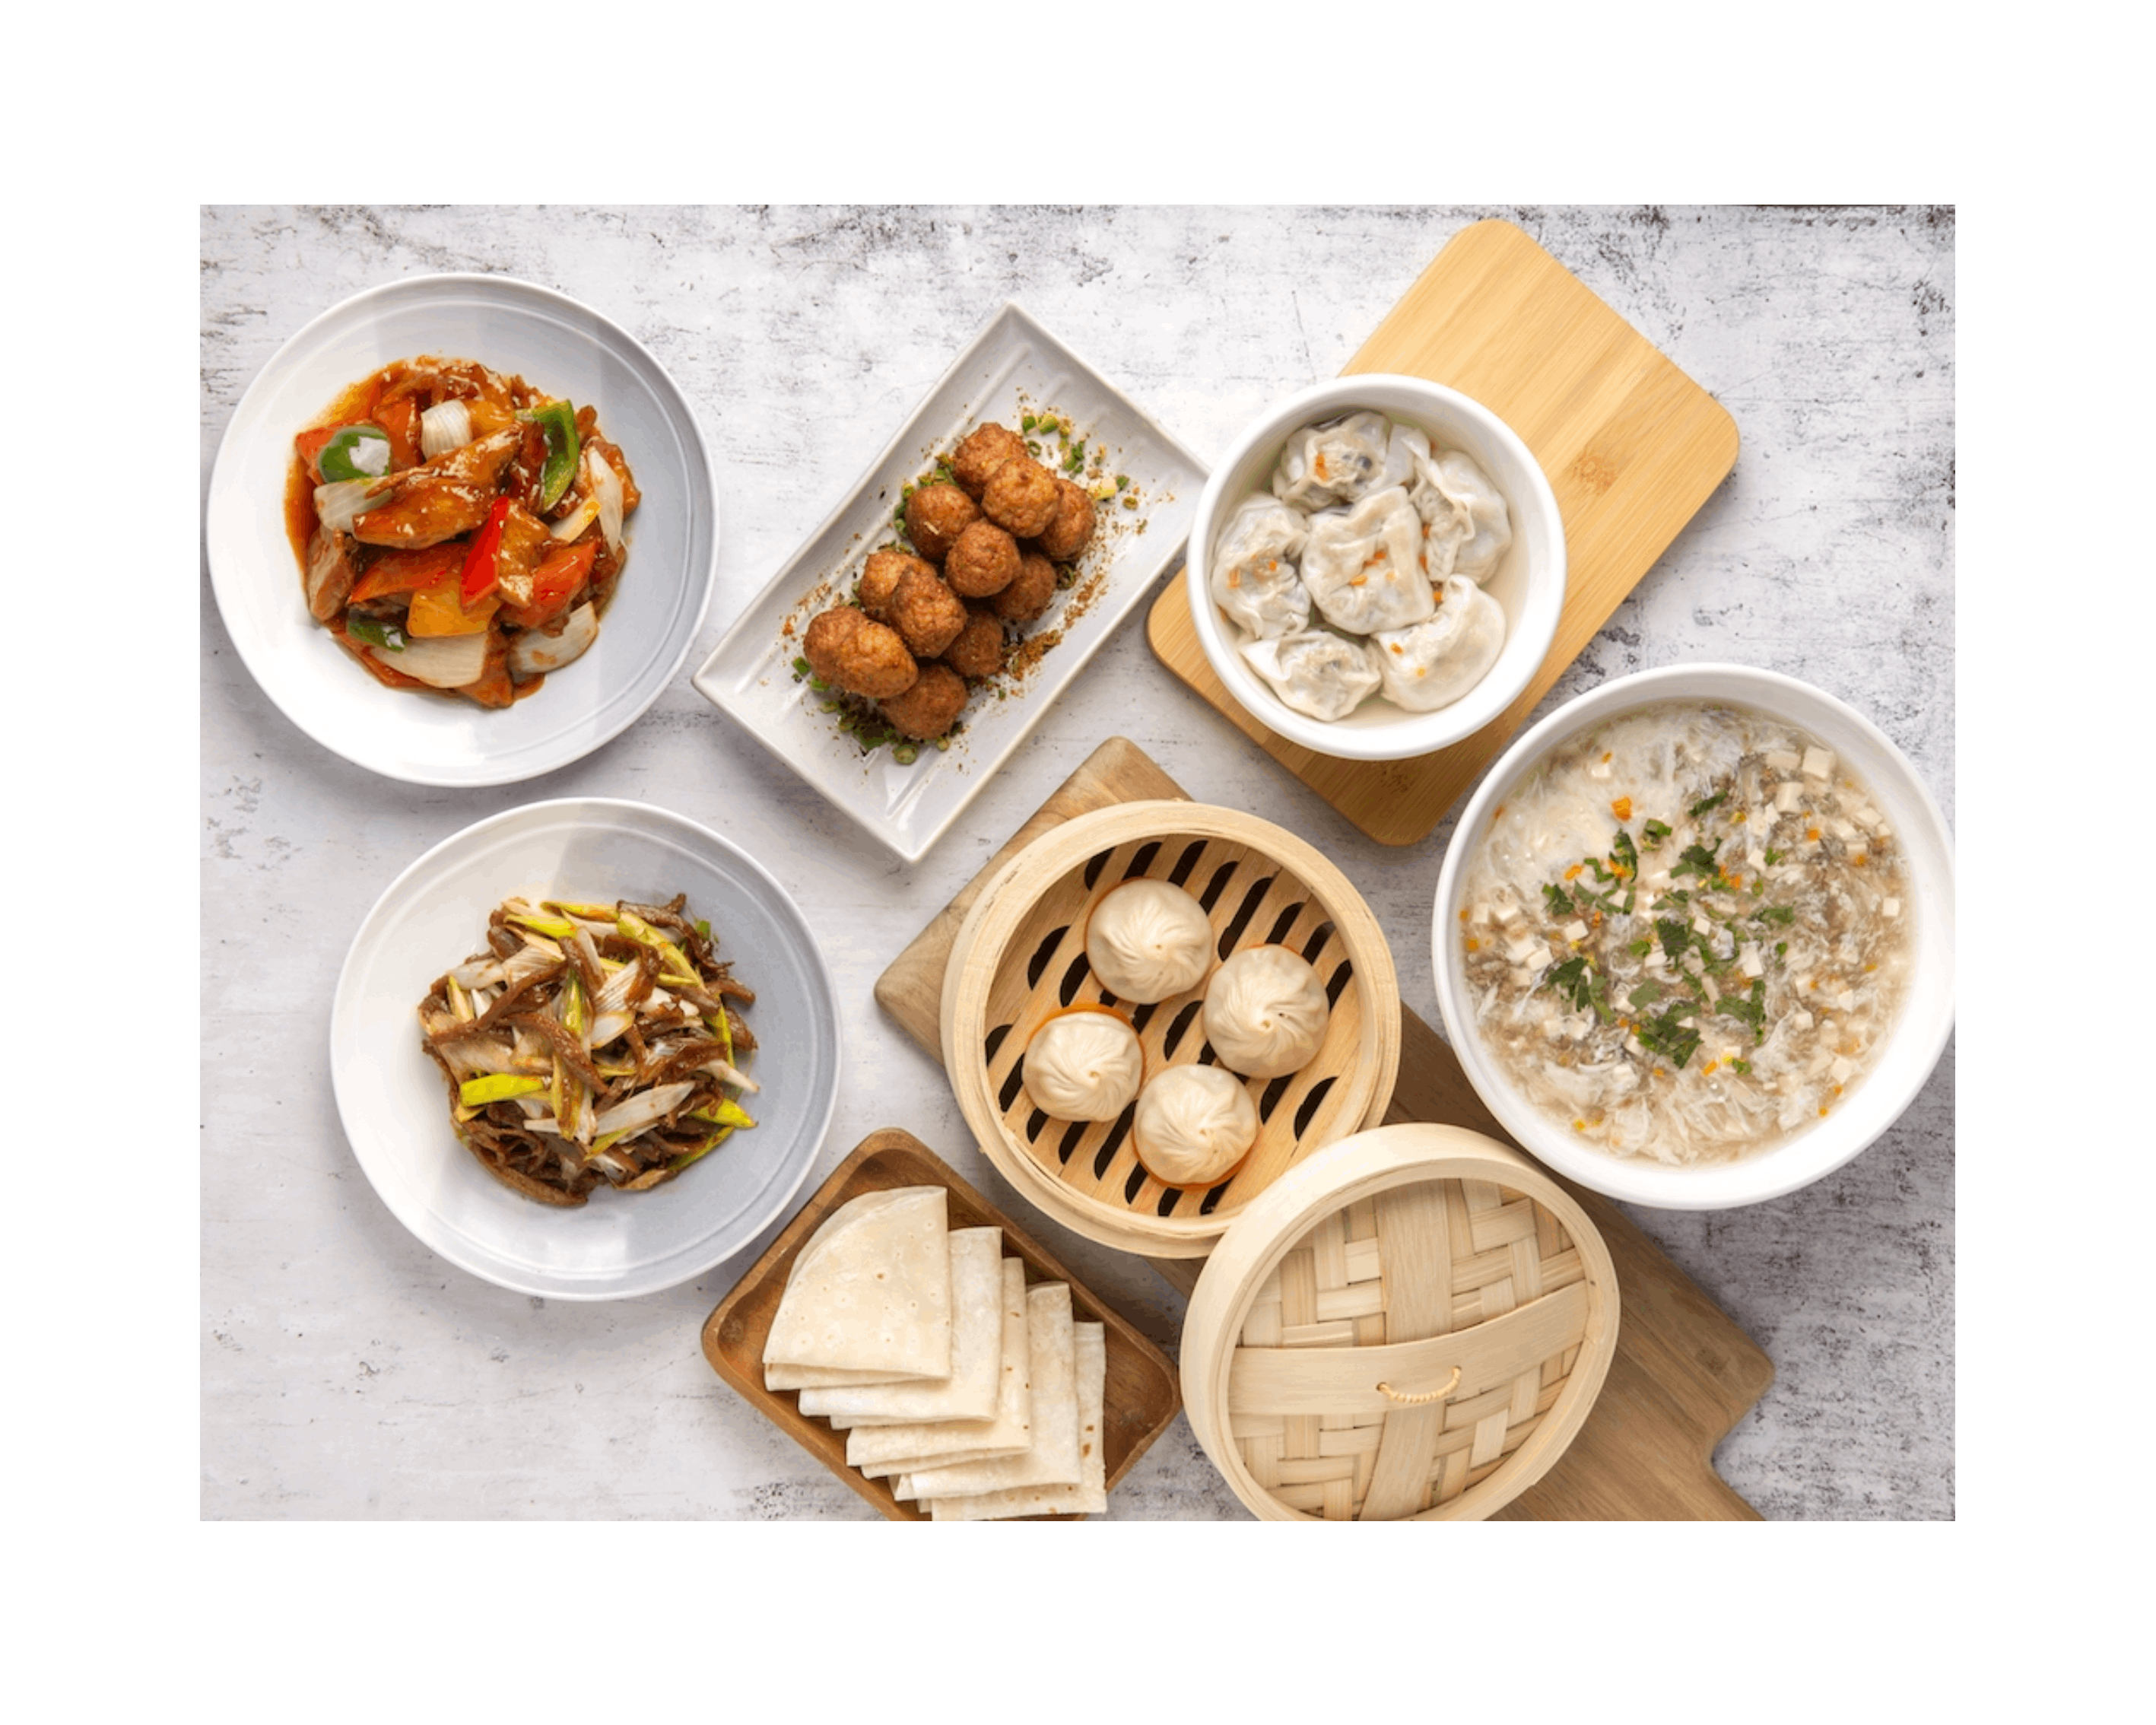 Crystal Jade Launches New Plant-Based Menu With Green Monday Across Asia